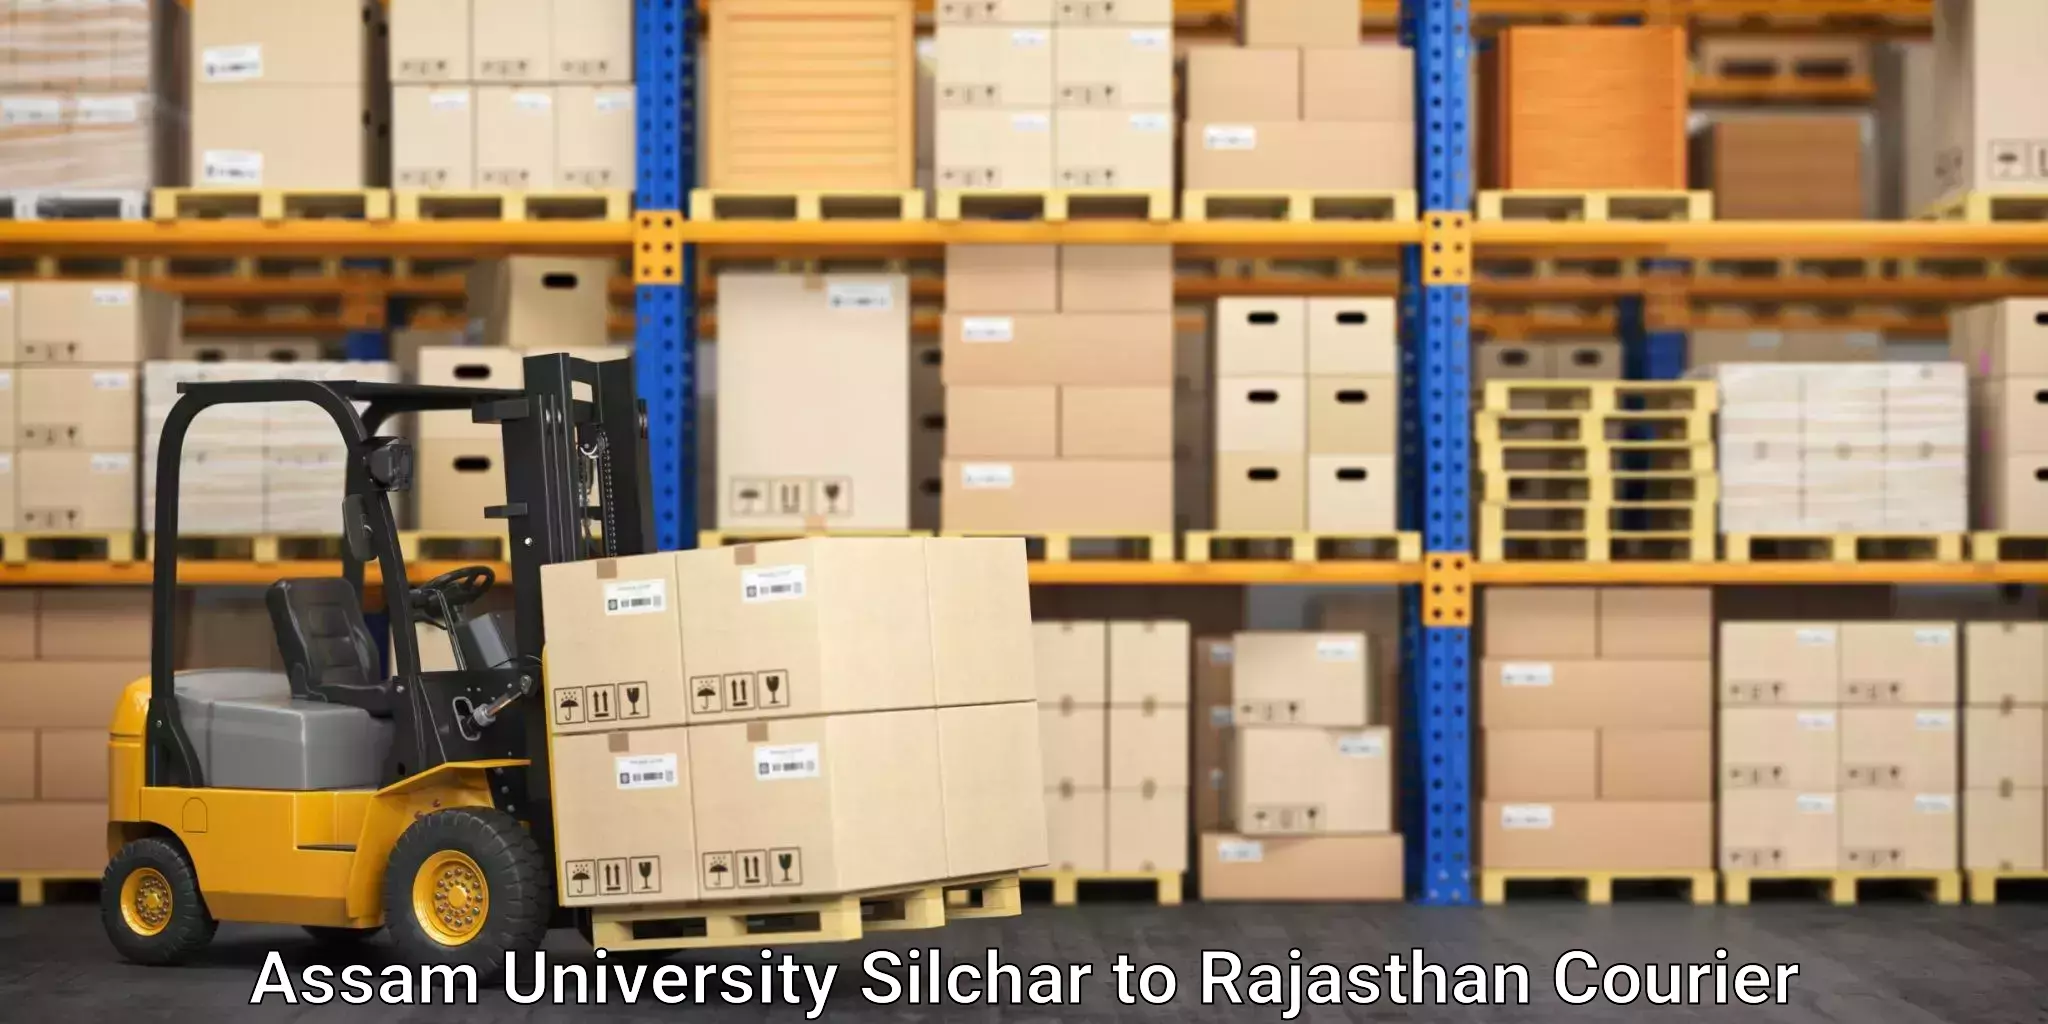 Express delivery network Assam University Silchar to Rajasthan